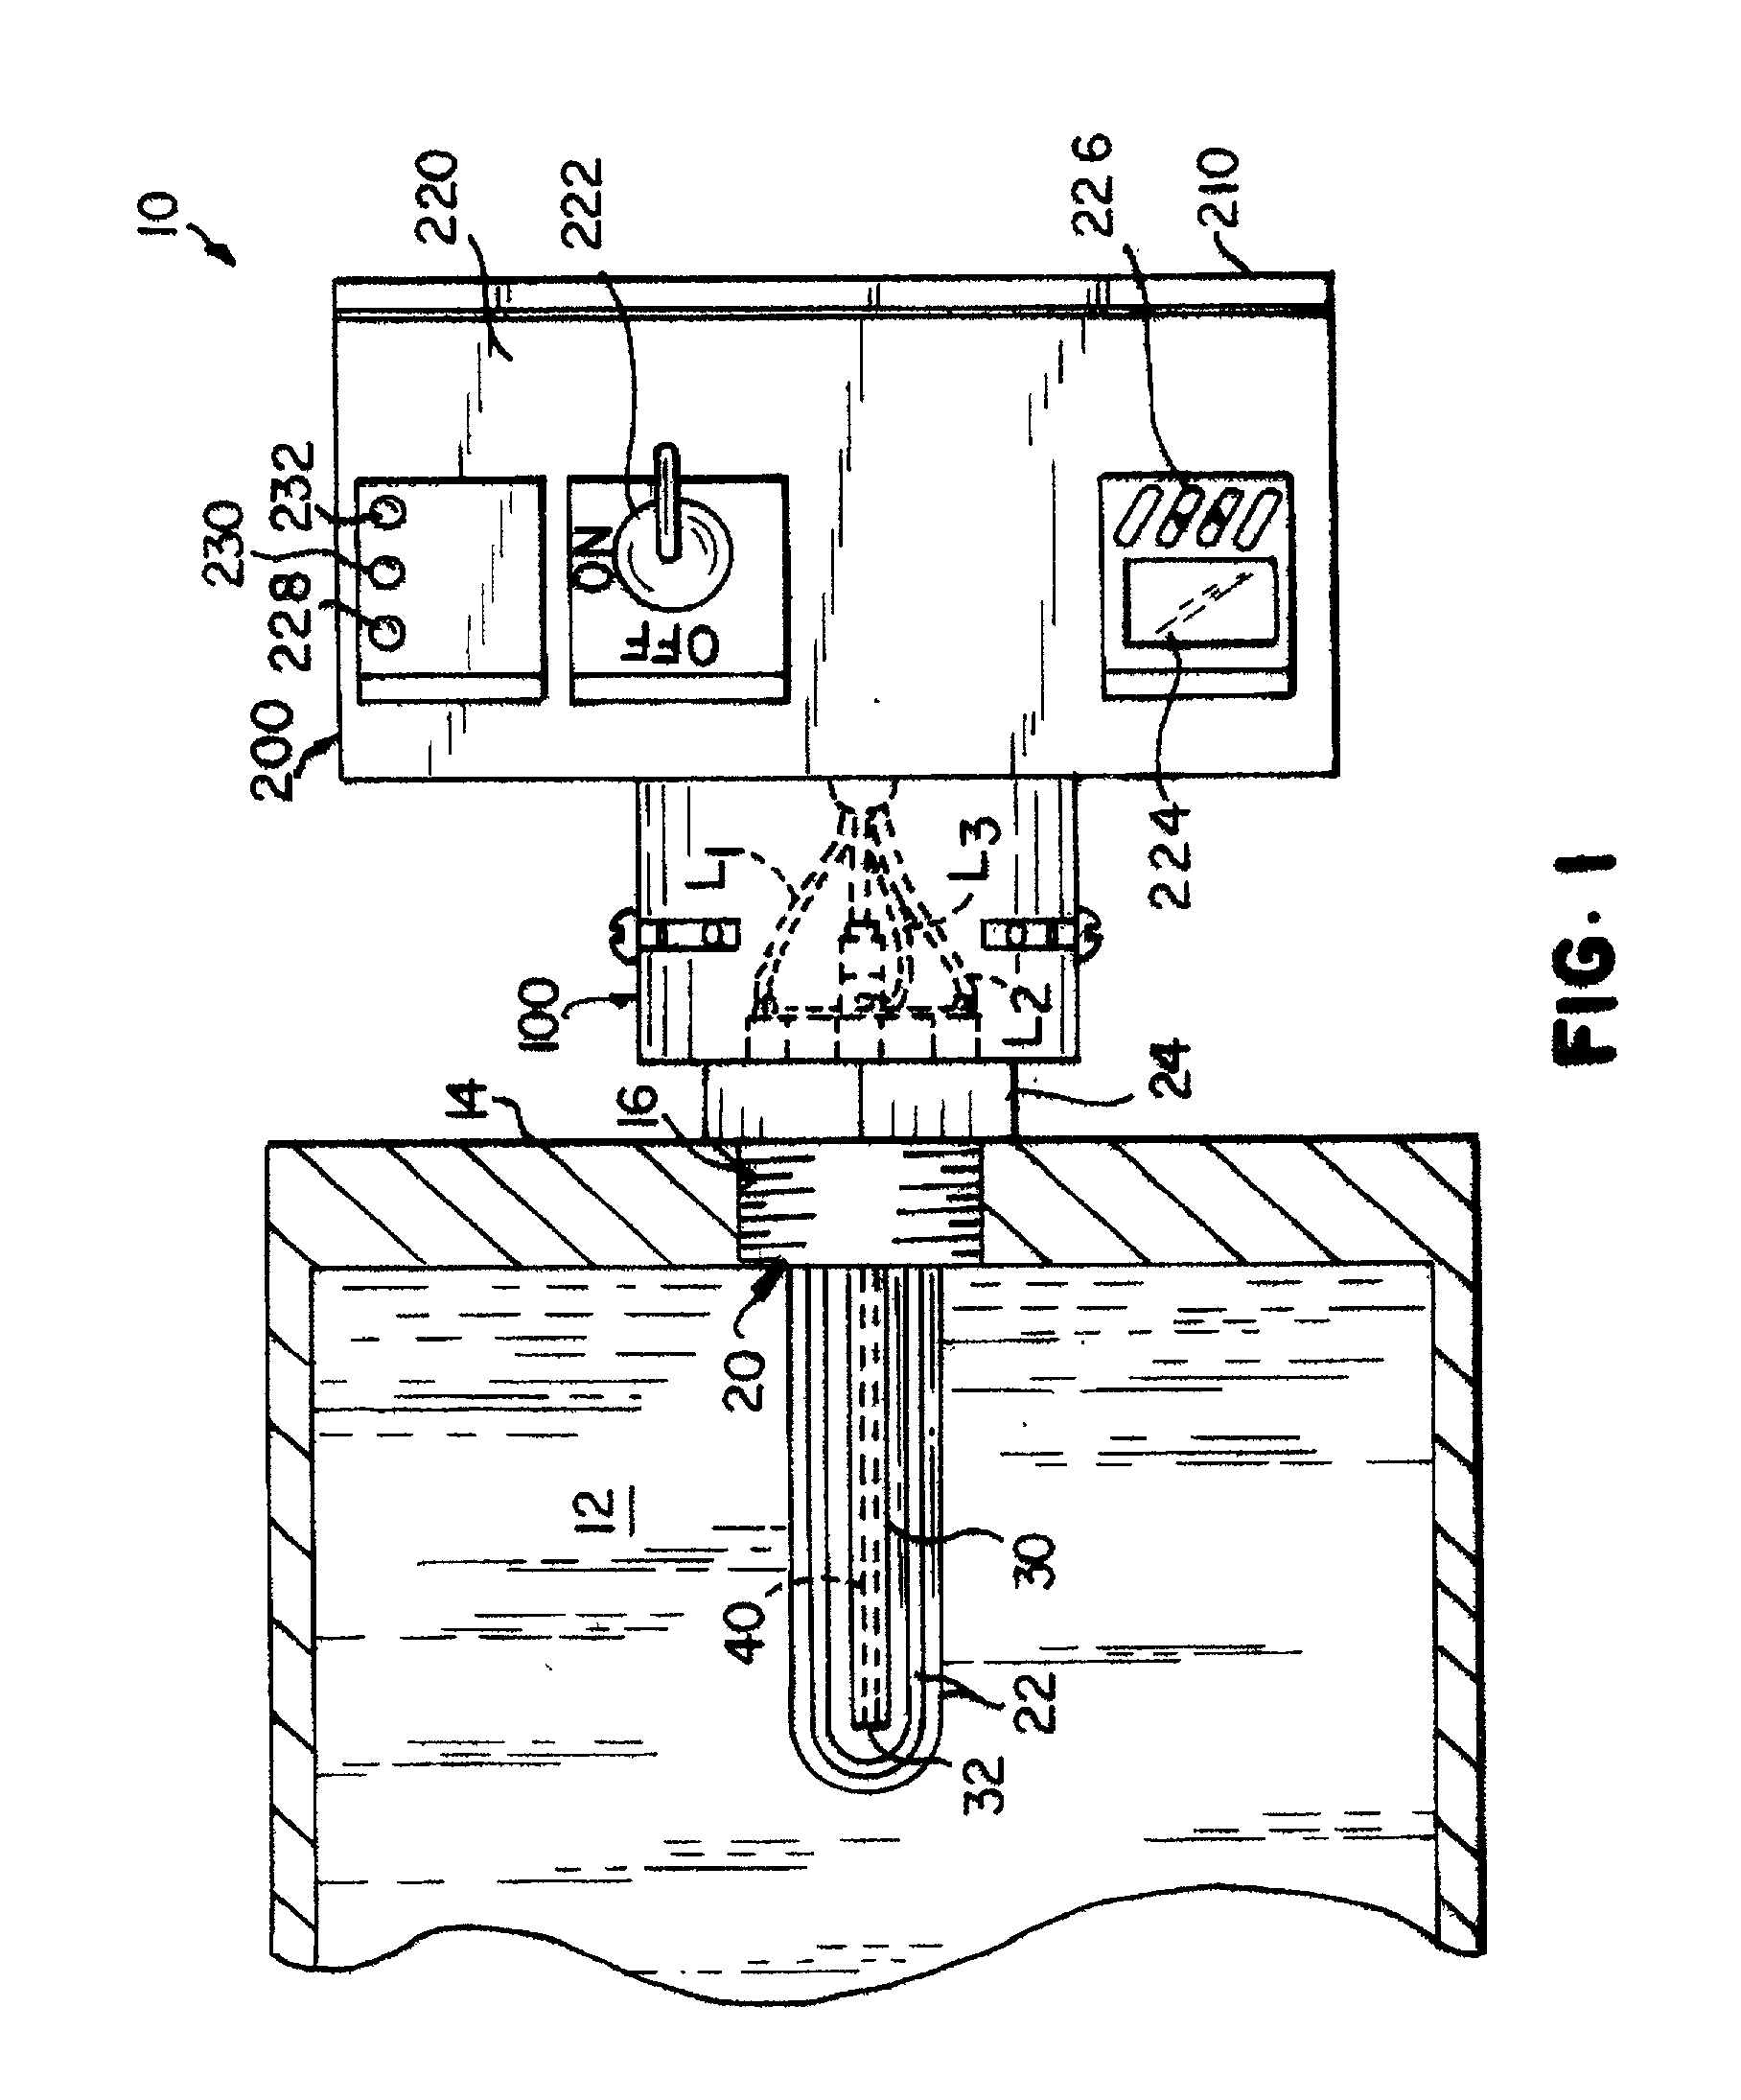 Integrated heater and controller assembly